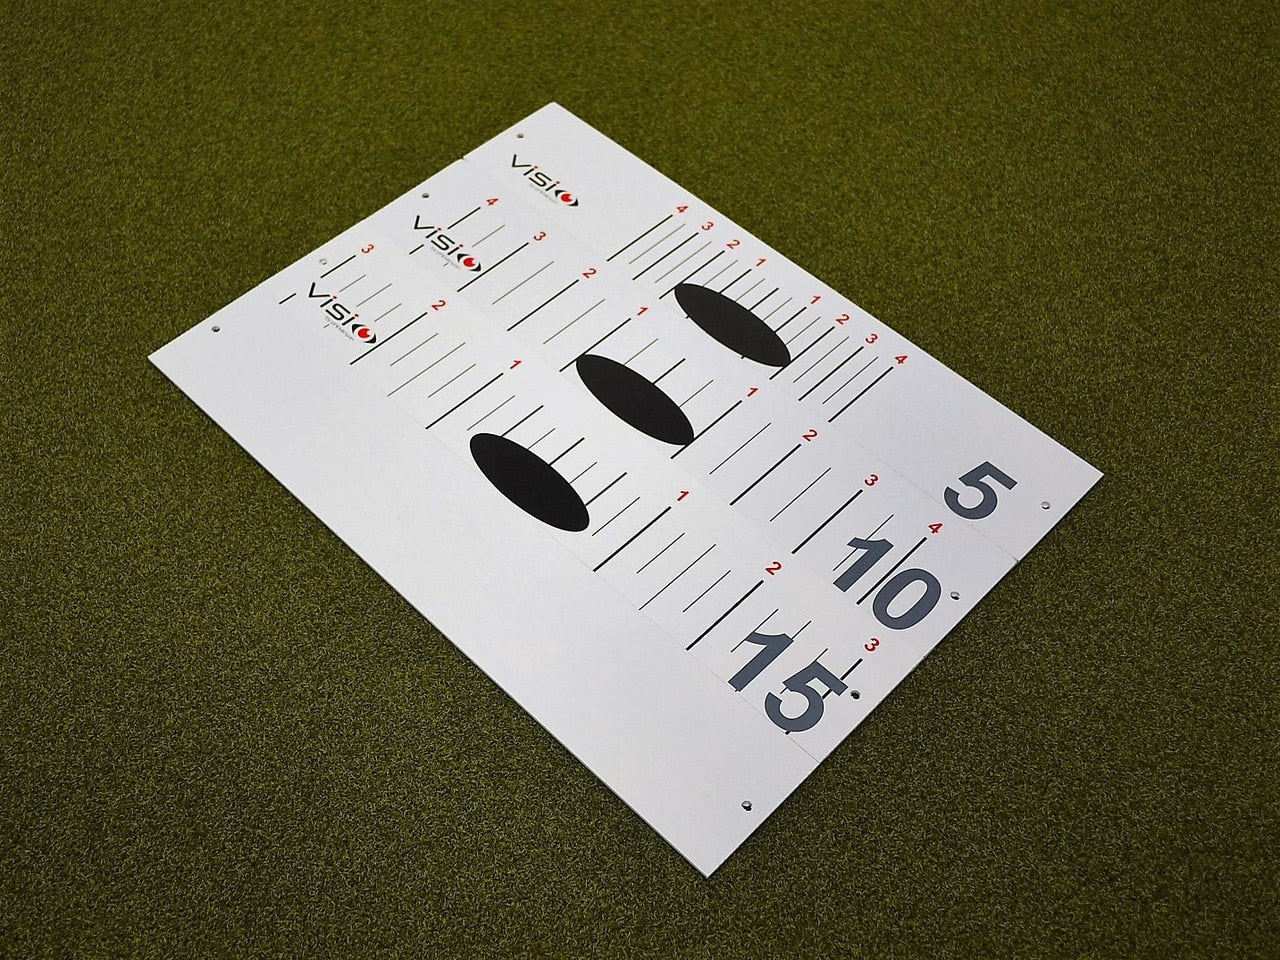 Aim Board for Putting